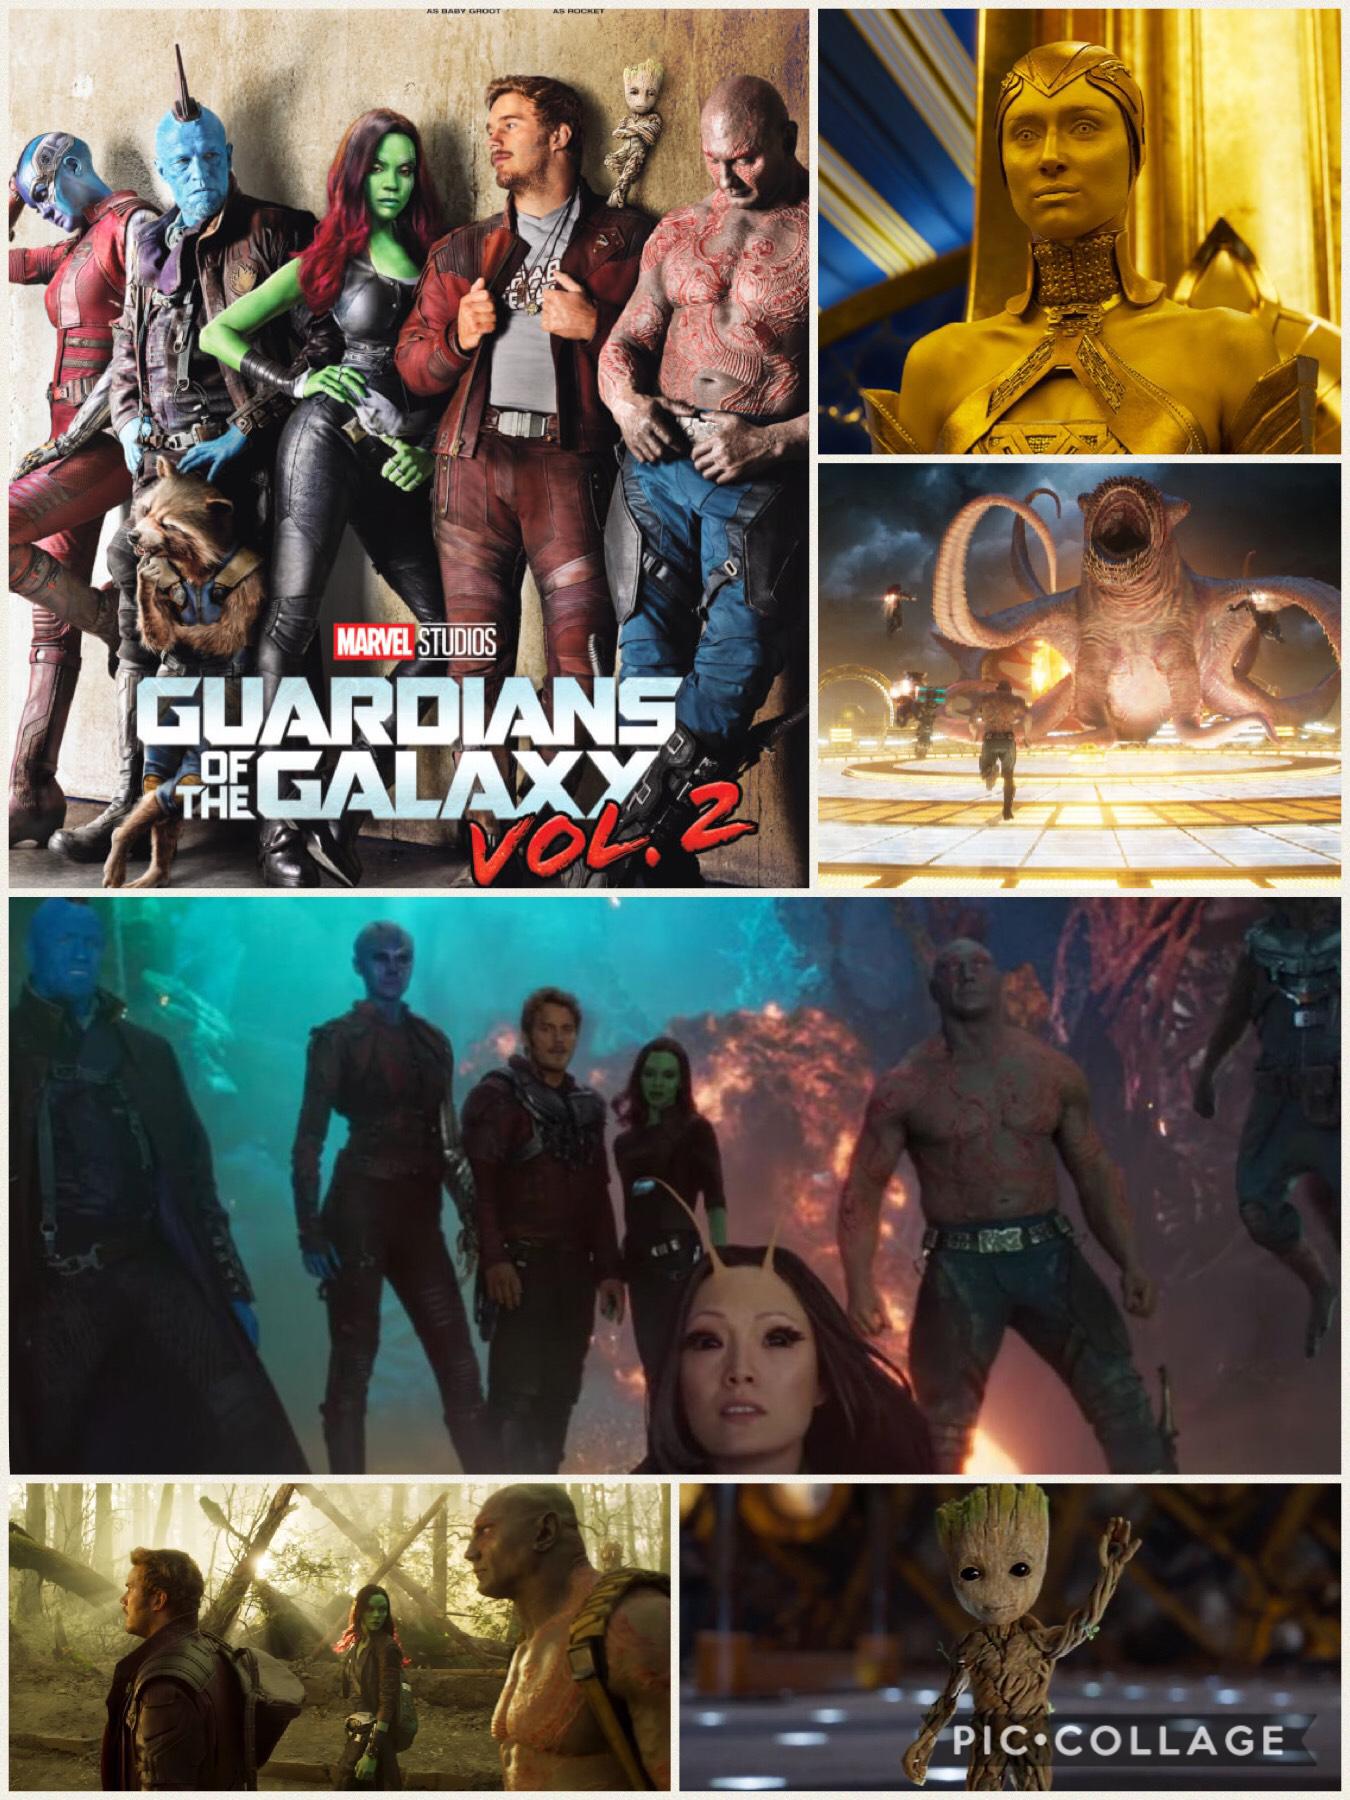 Guardians of the galaxy Vol 2